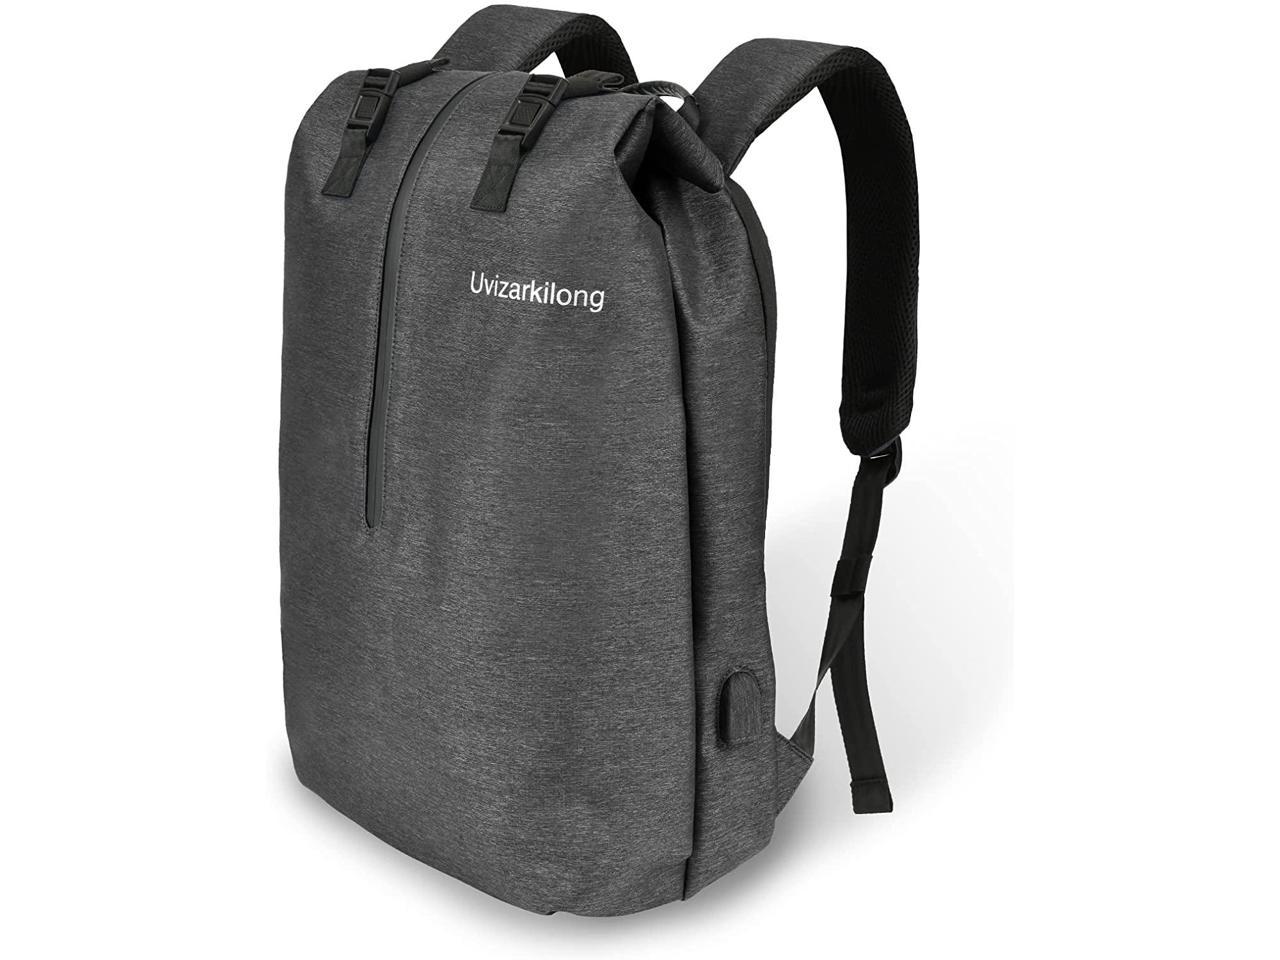 N/C Gg Magree Extra Large Backpacks with USB Charging Port 